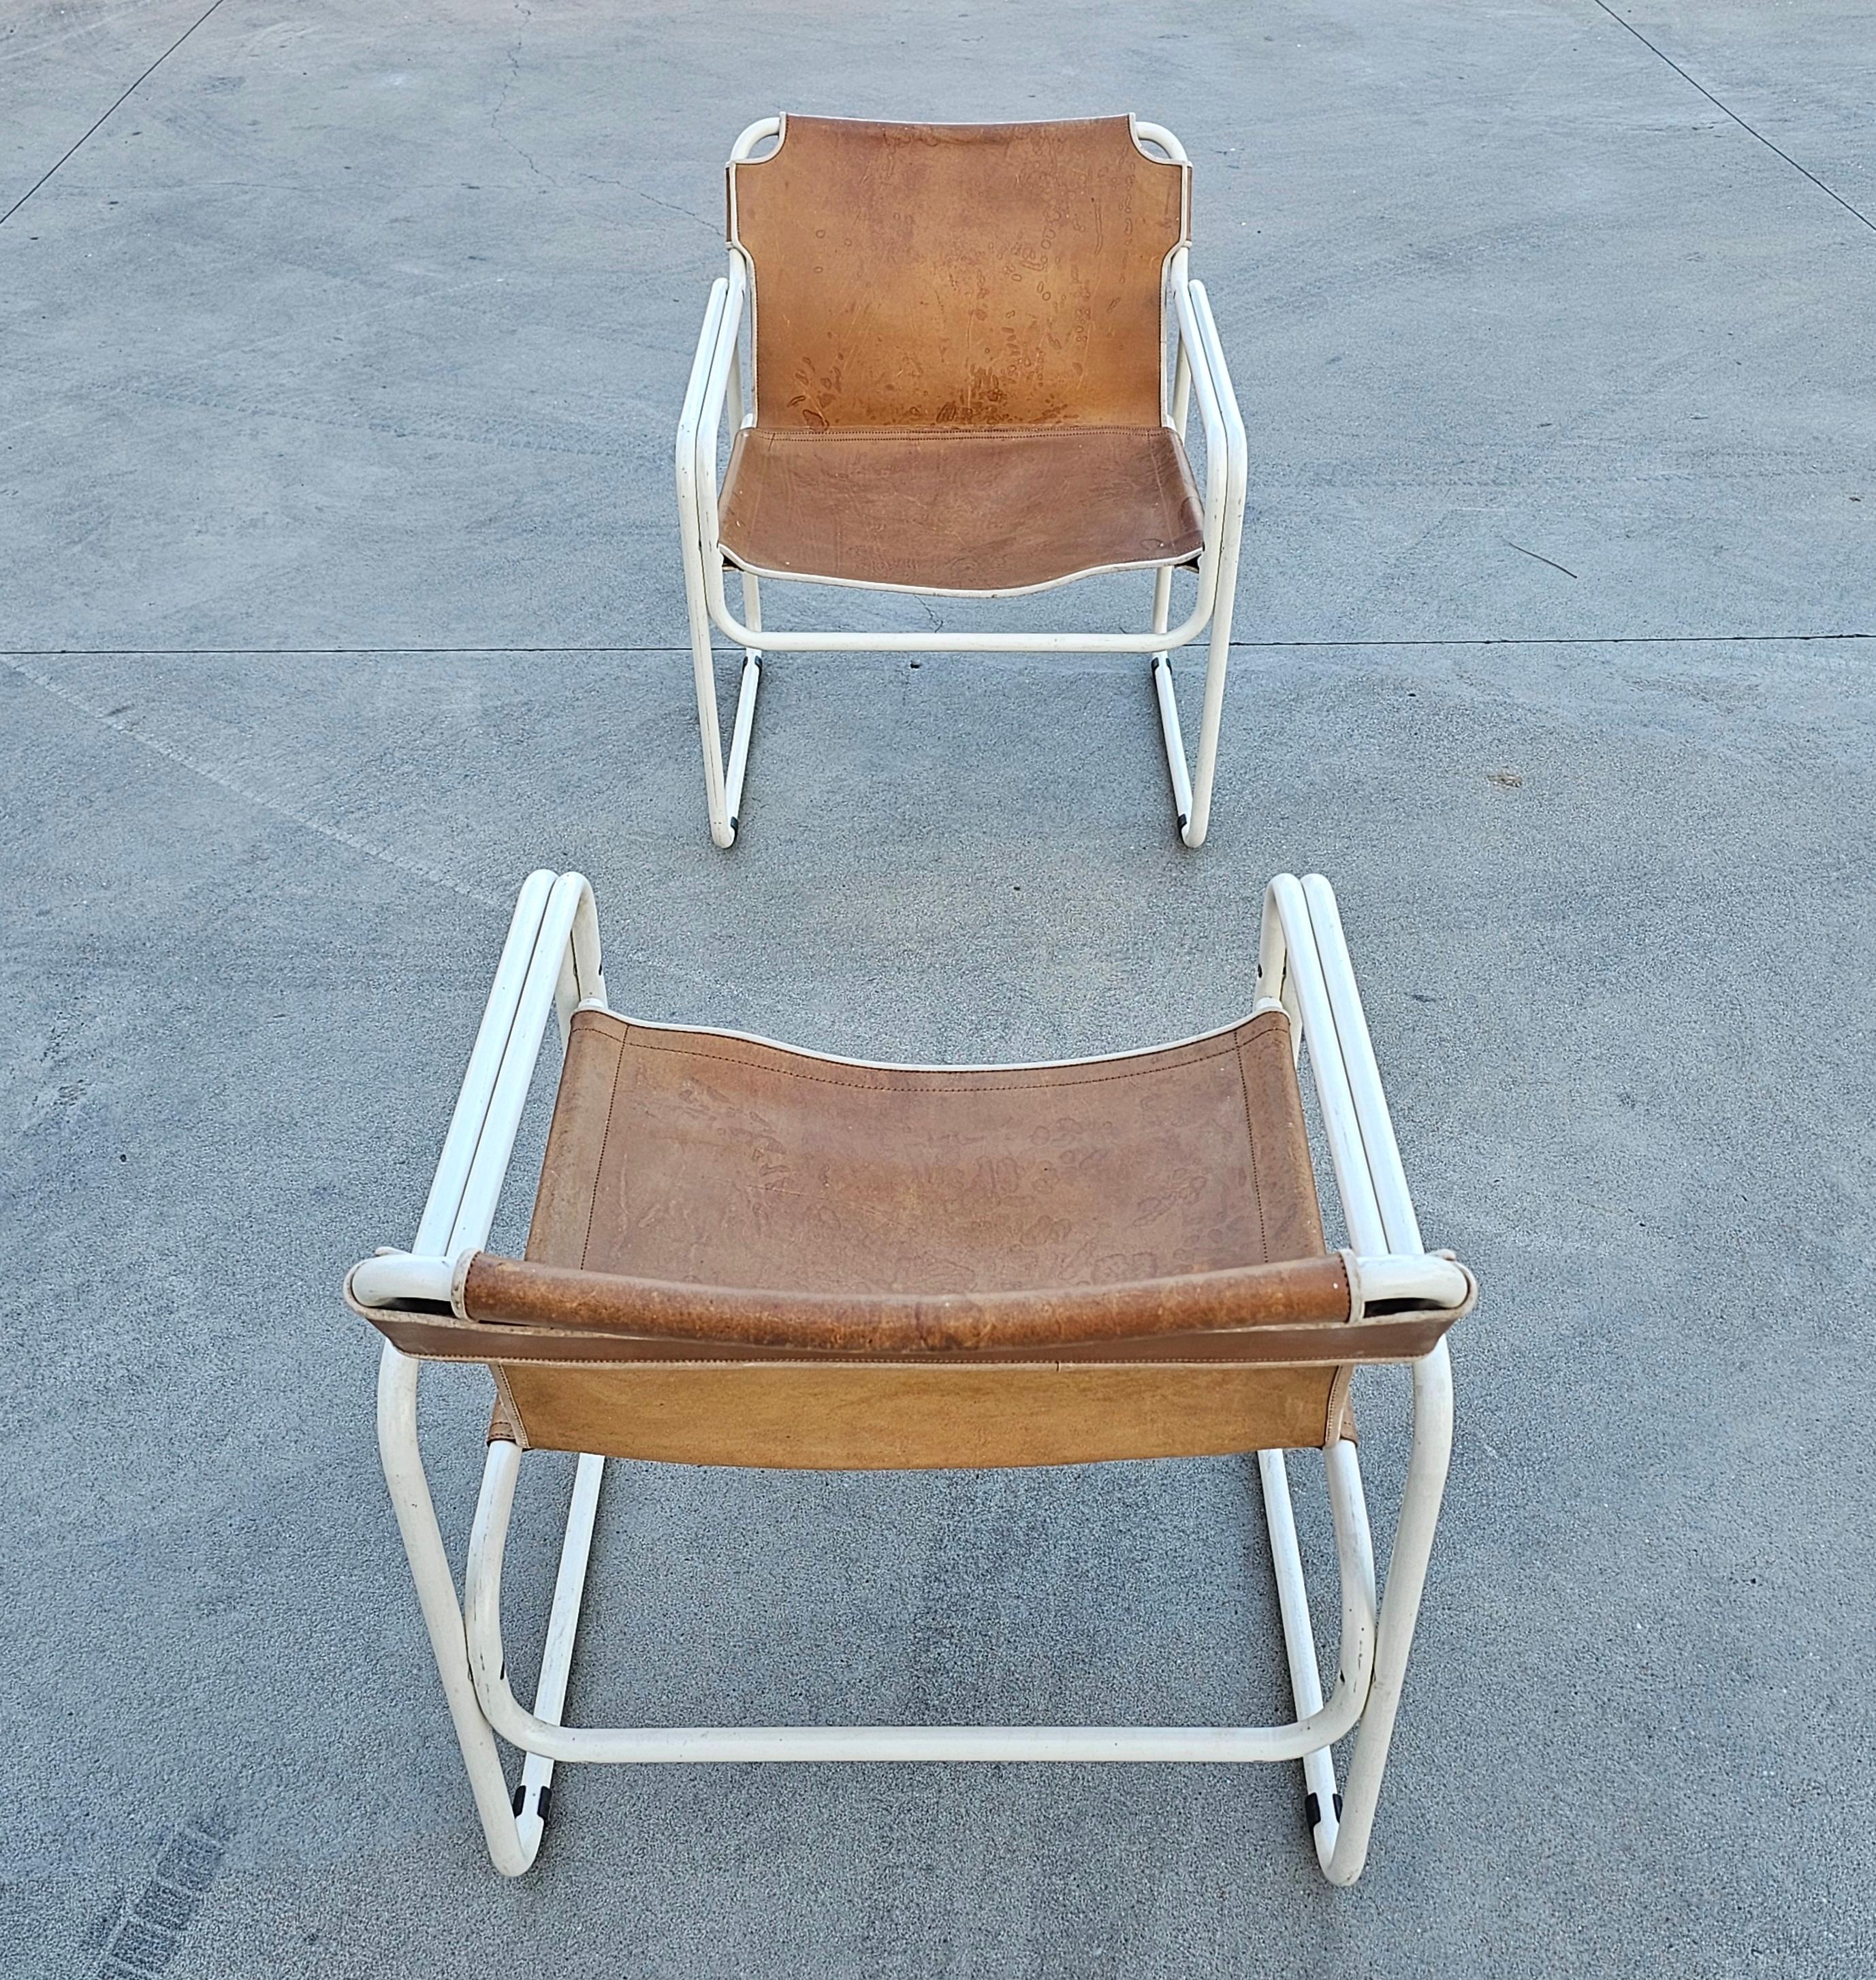 Bauhaus Style Tubular Easy Chairs in Cognac Leather by Jox Interni, 1970s For Sale 2